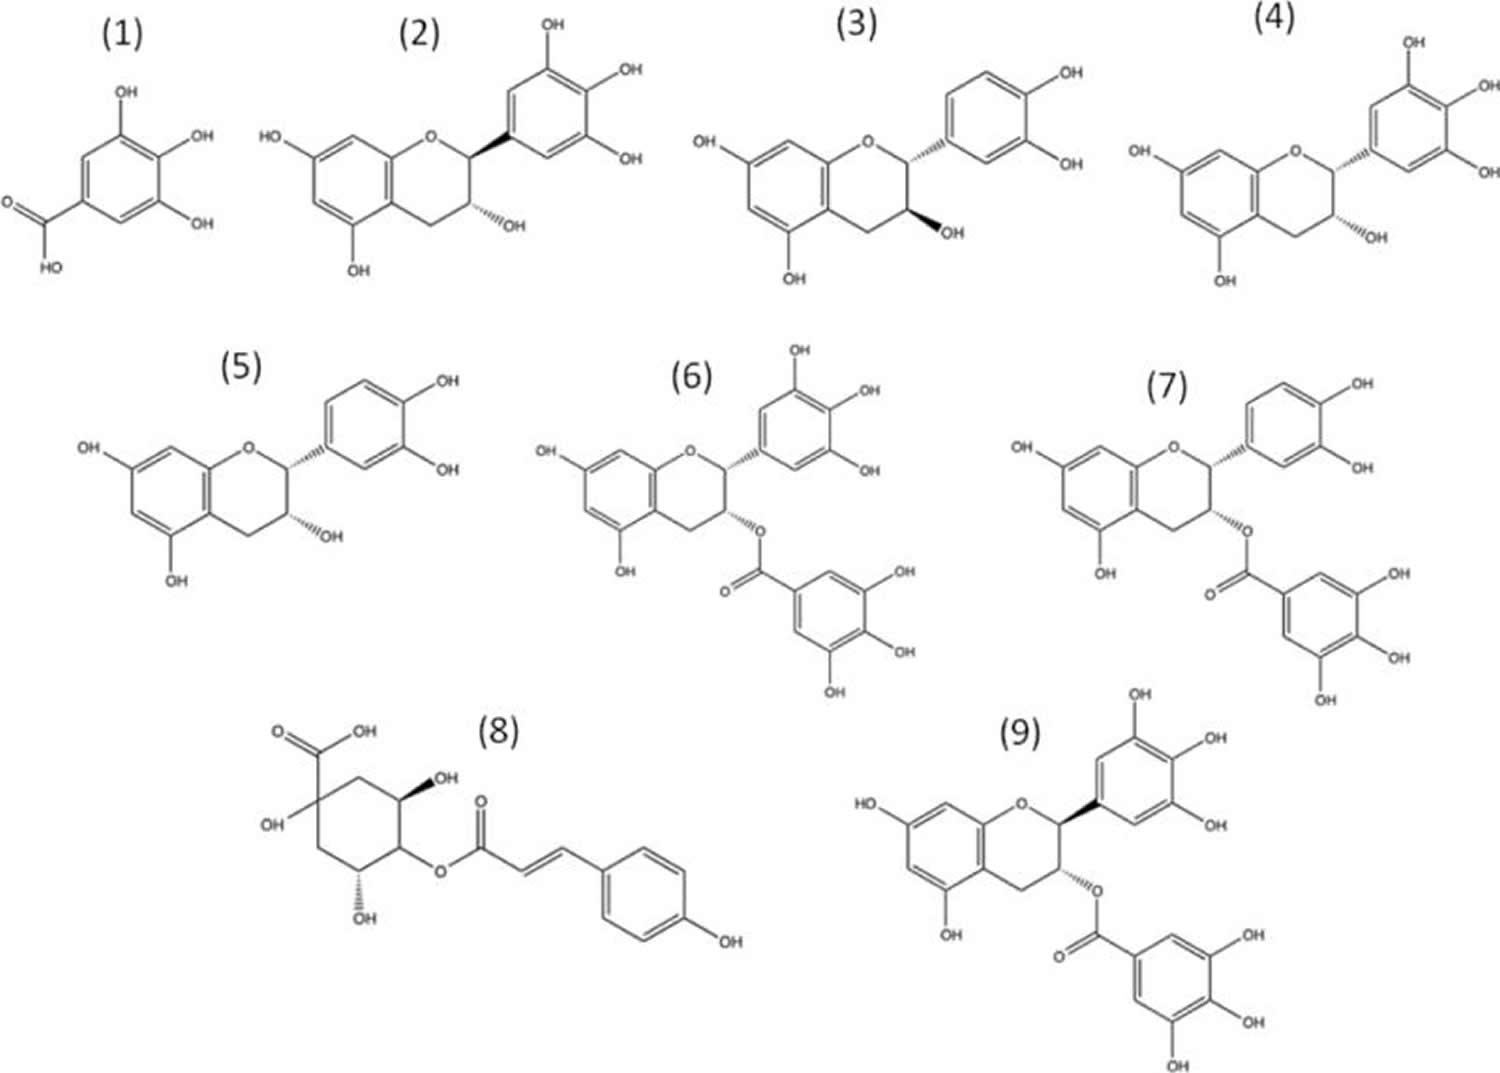 Chemical structures of the major green tea polyphenols